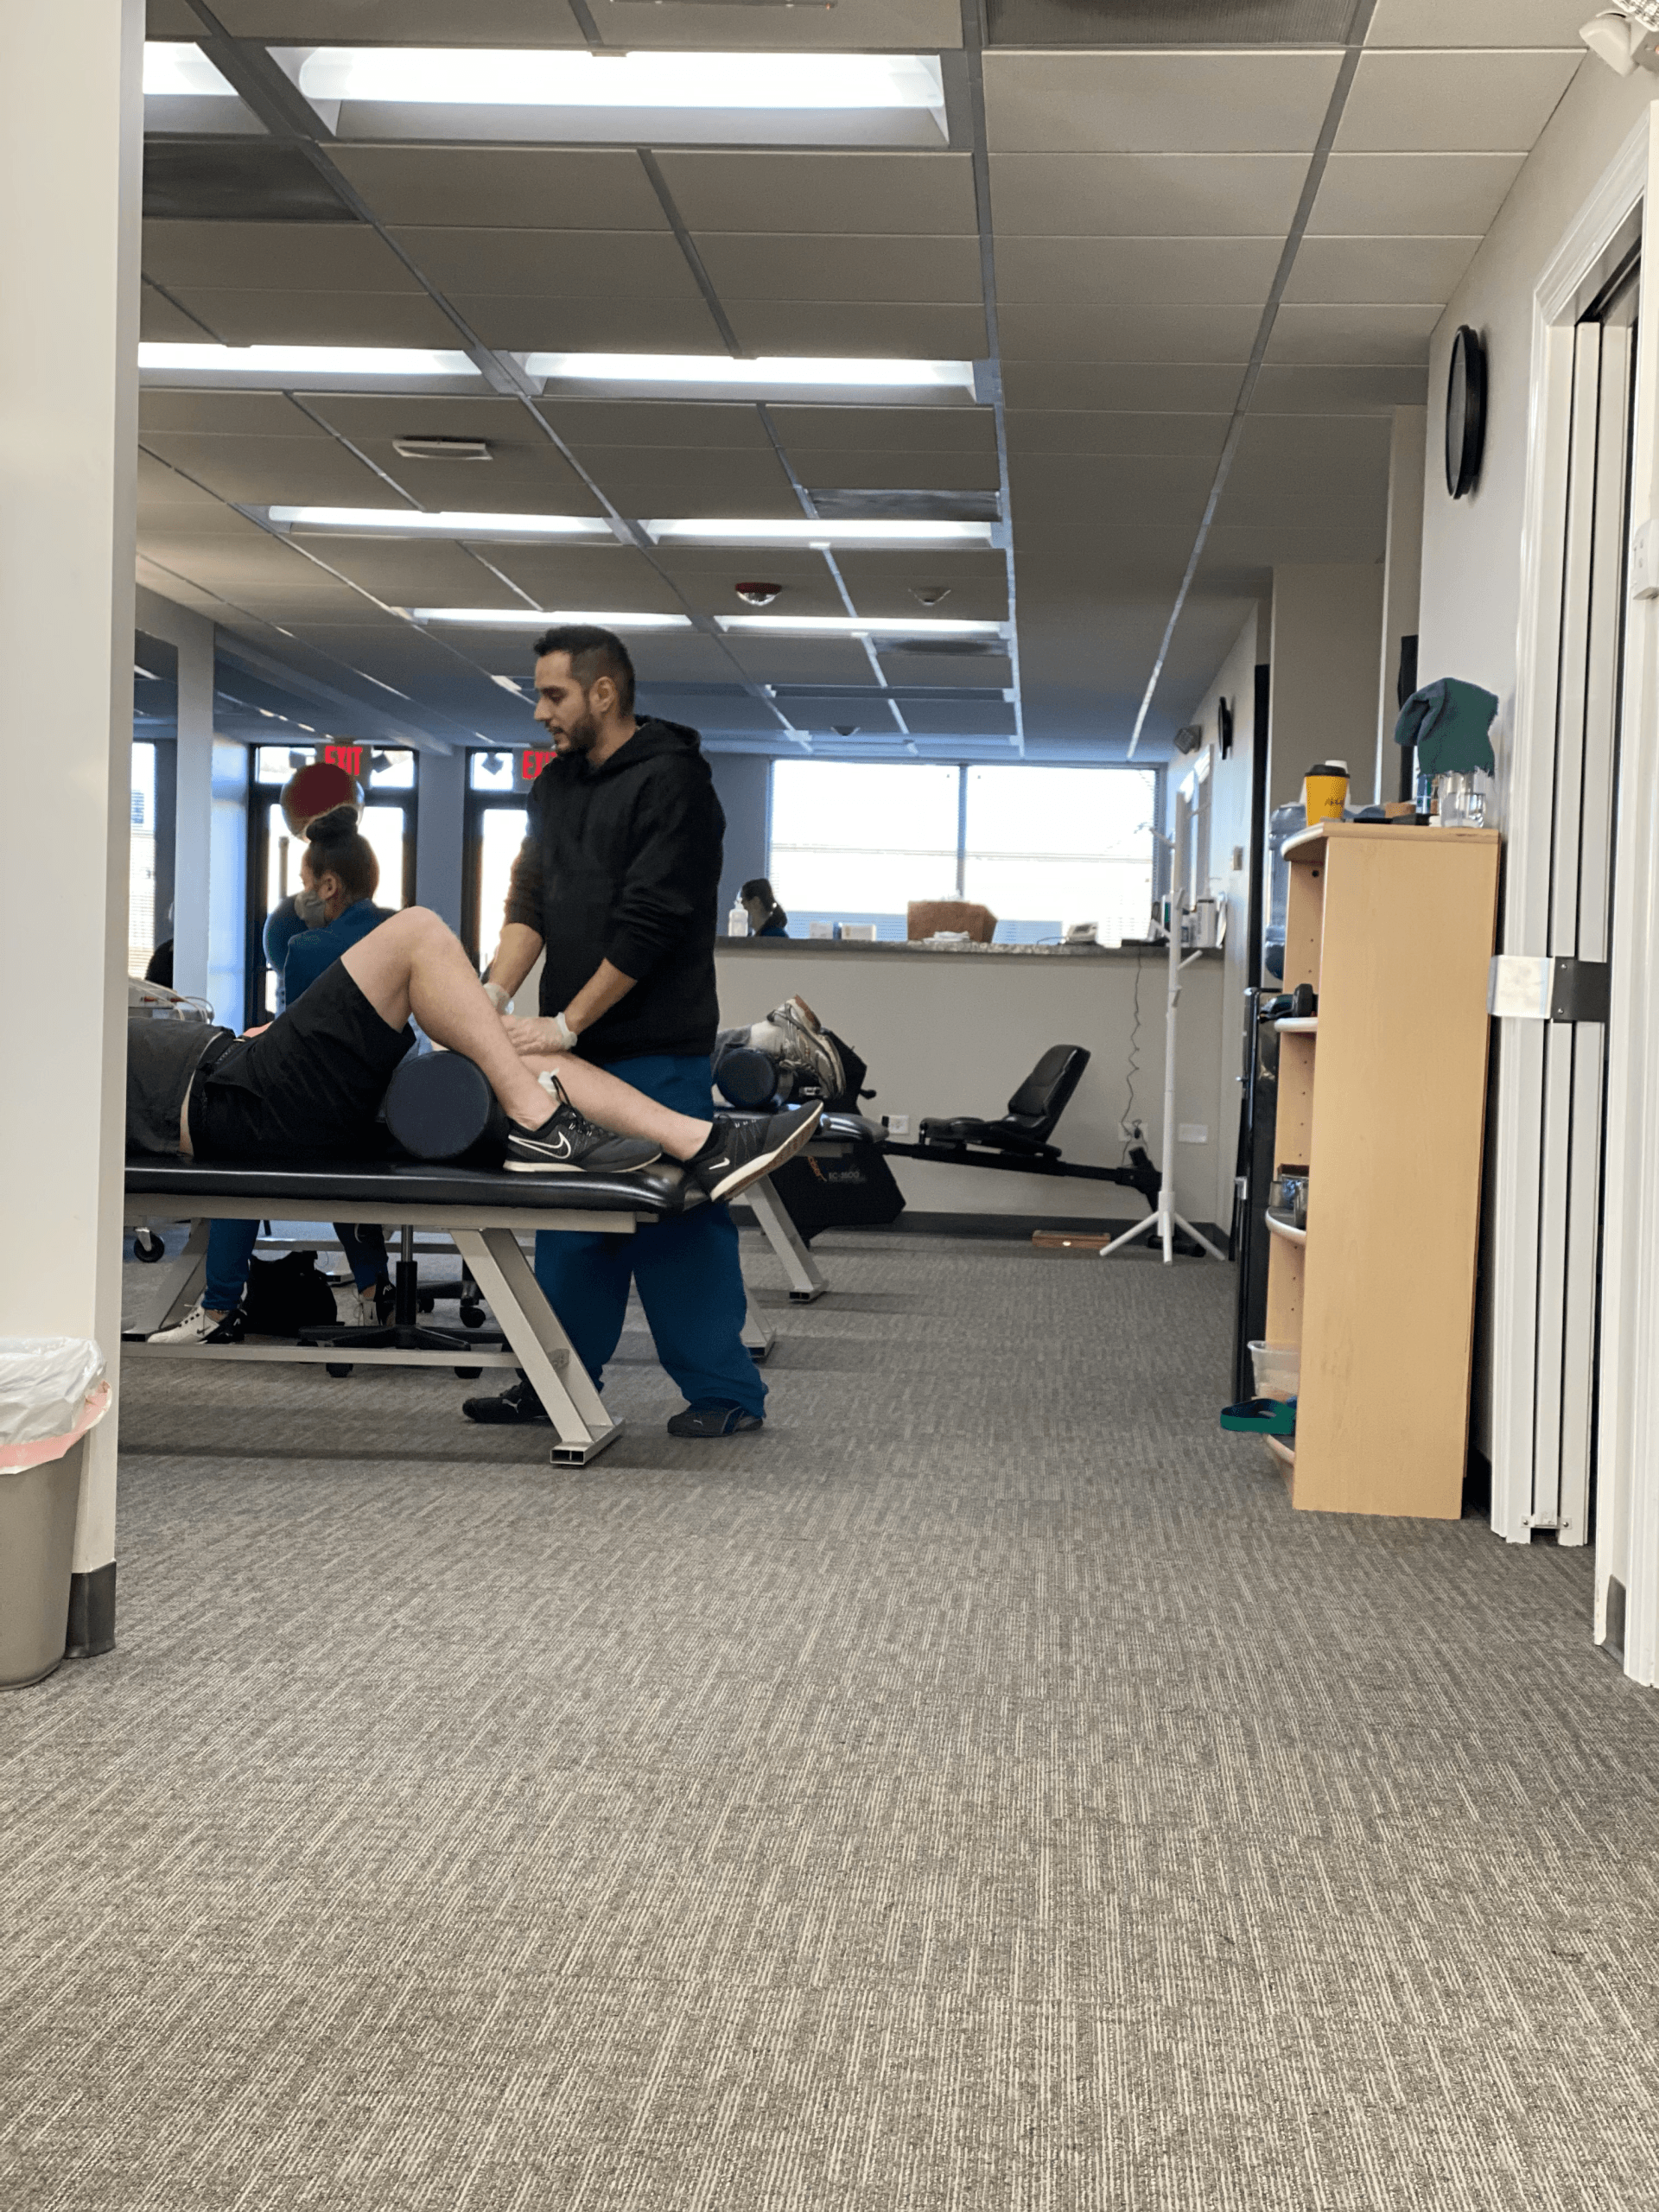 a man is stretching a woman 's leg in a gym .